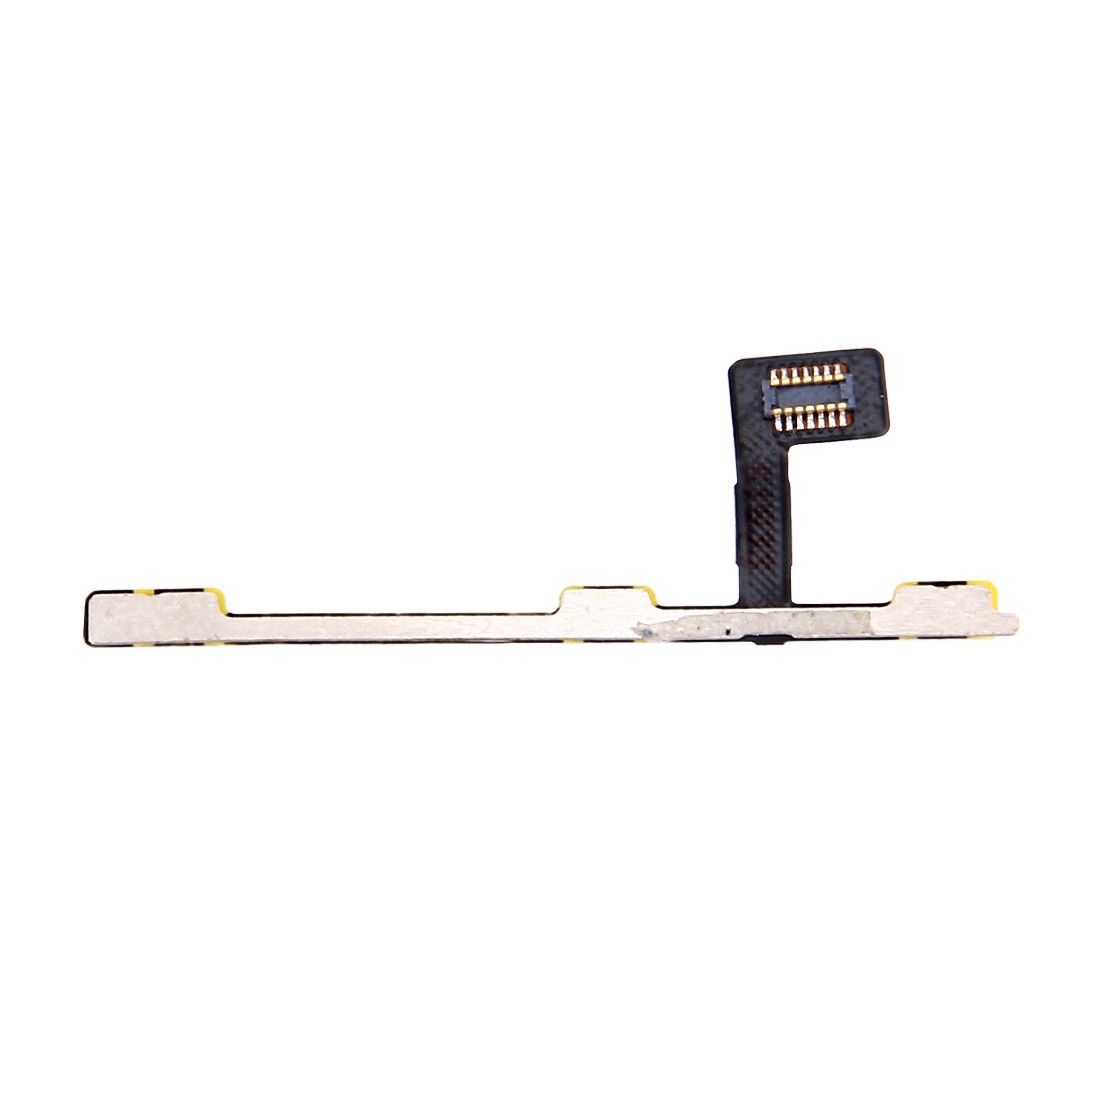 OnePlus Two (1+2) Replacement Volume Power On/Off Button Flex Cable for [product_price] - First Help Tech